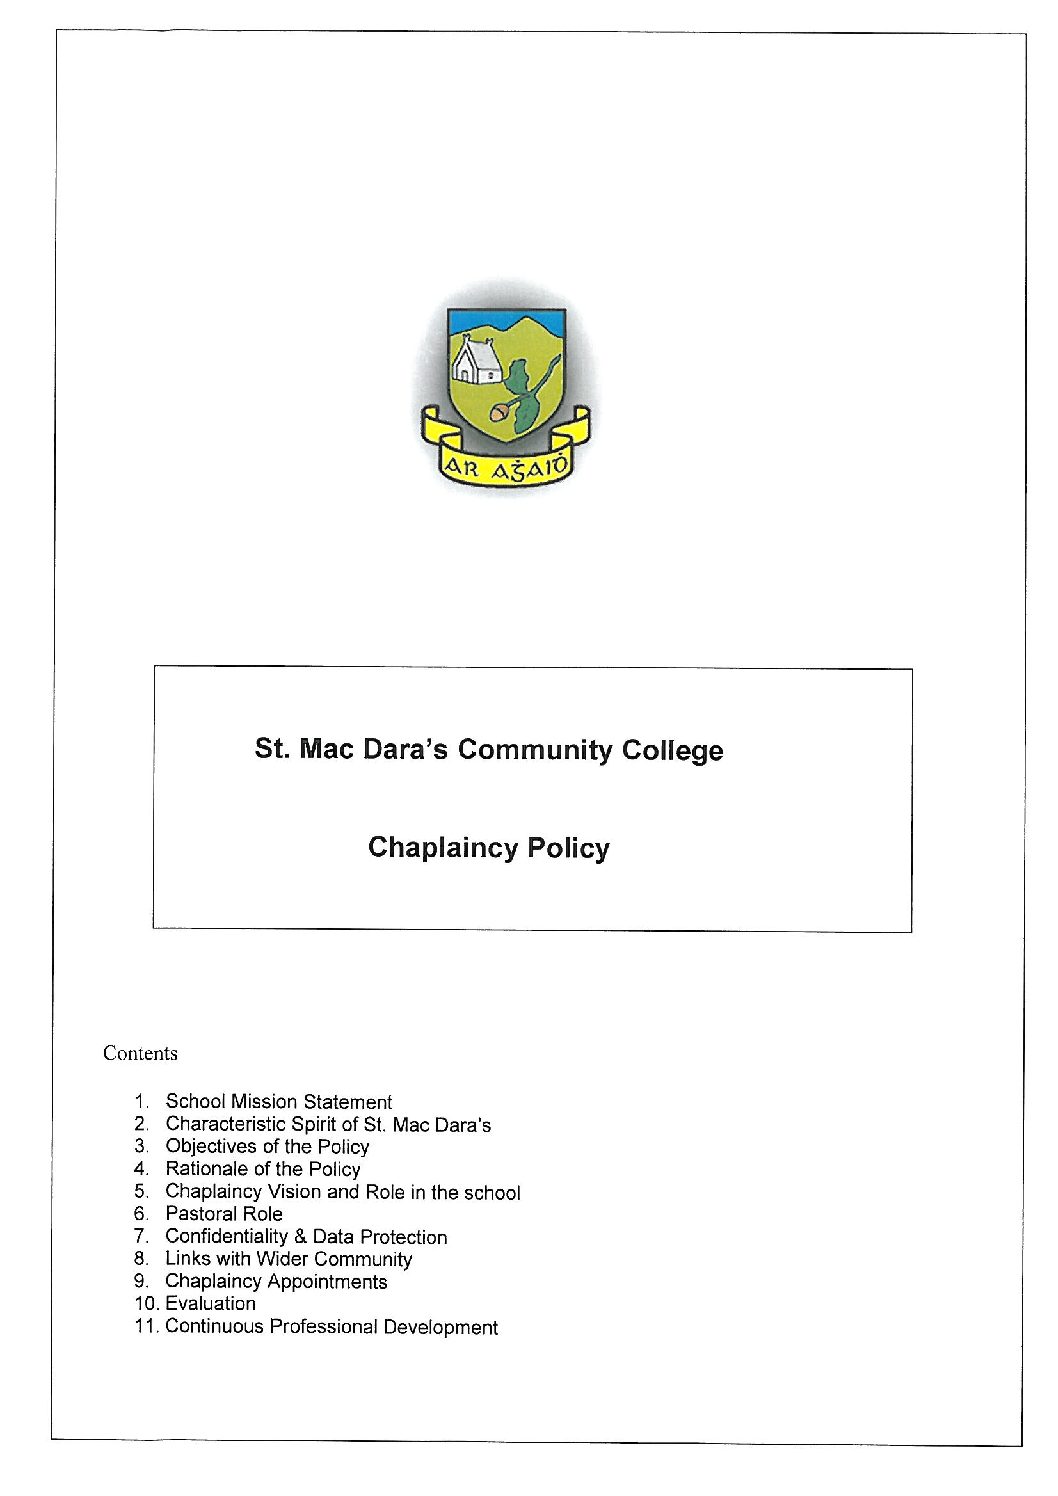 Chaplaincy Policy